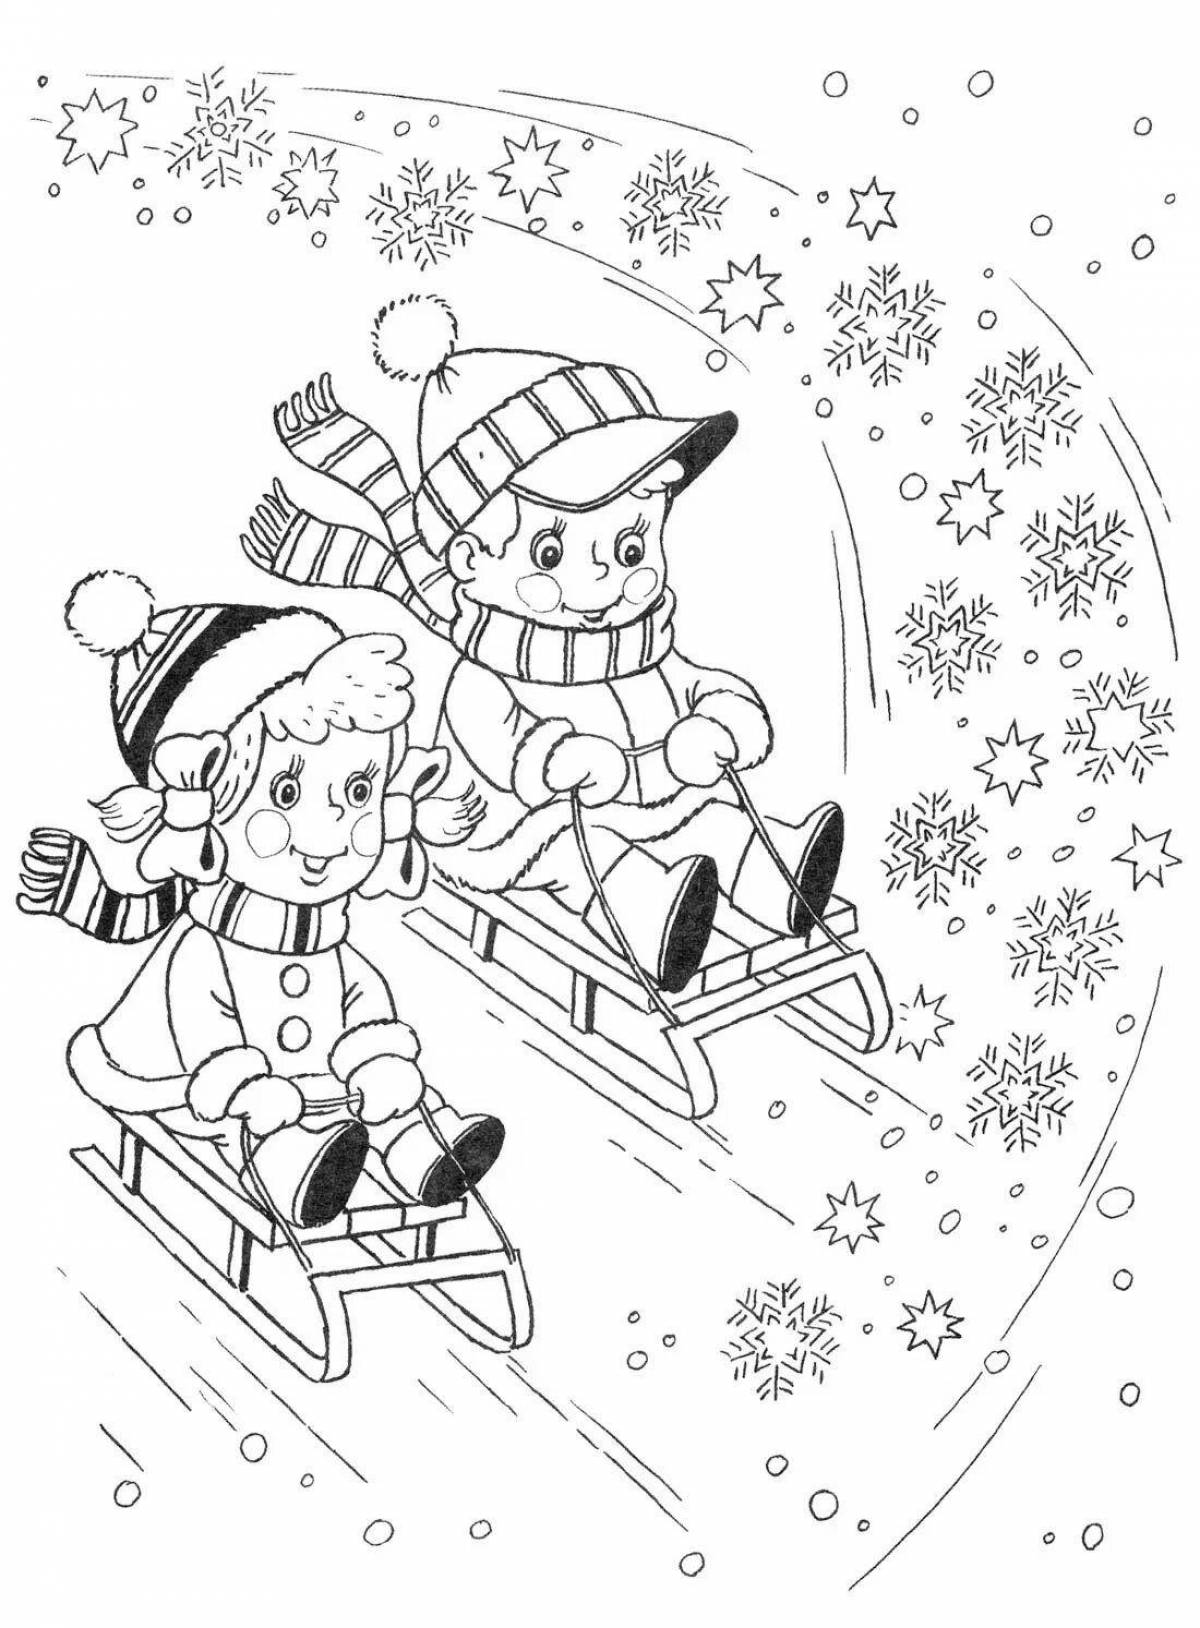 Joyful winter coloring book for children 8 years old